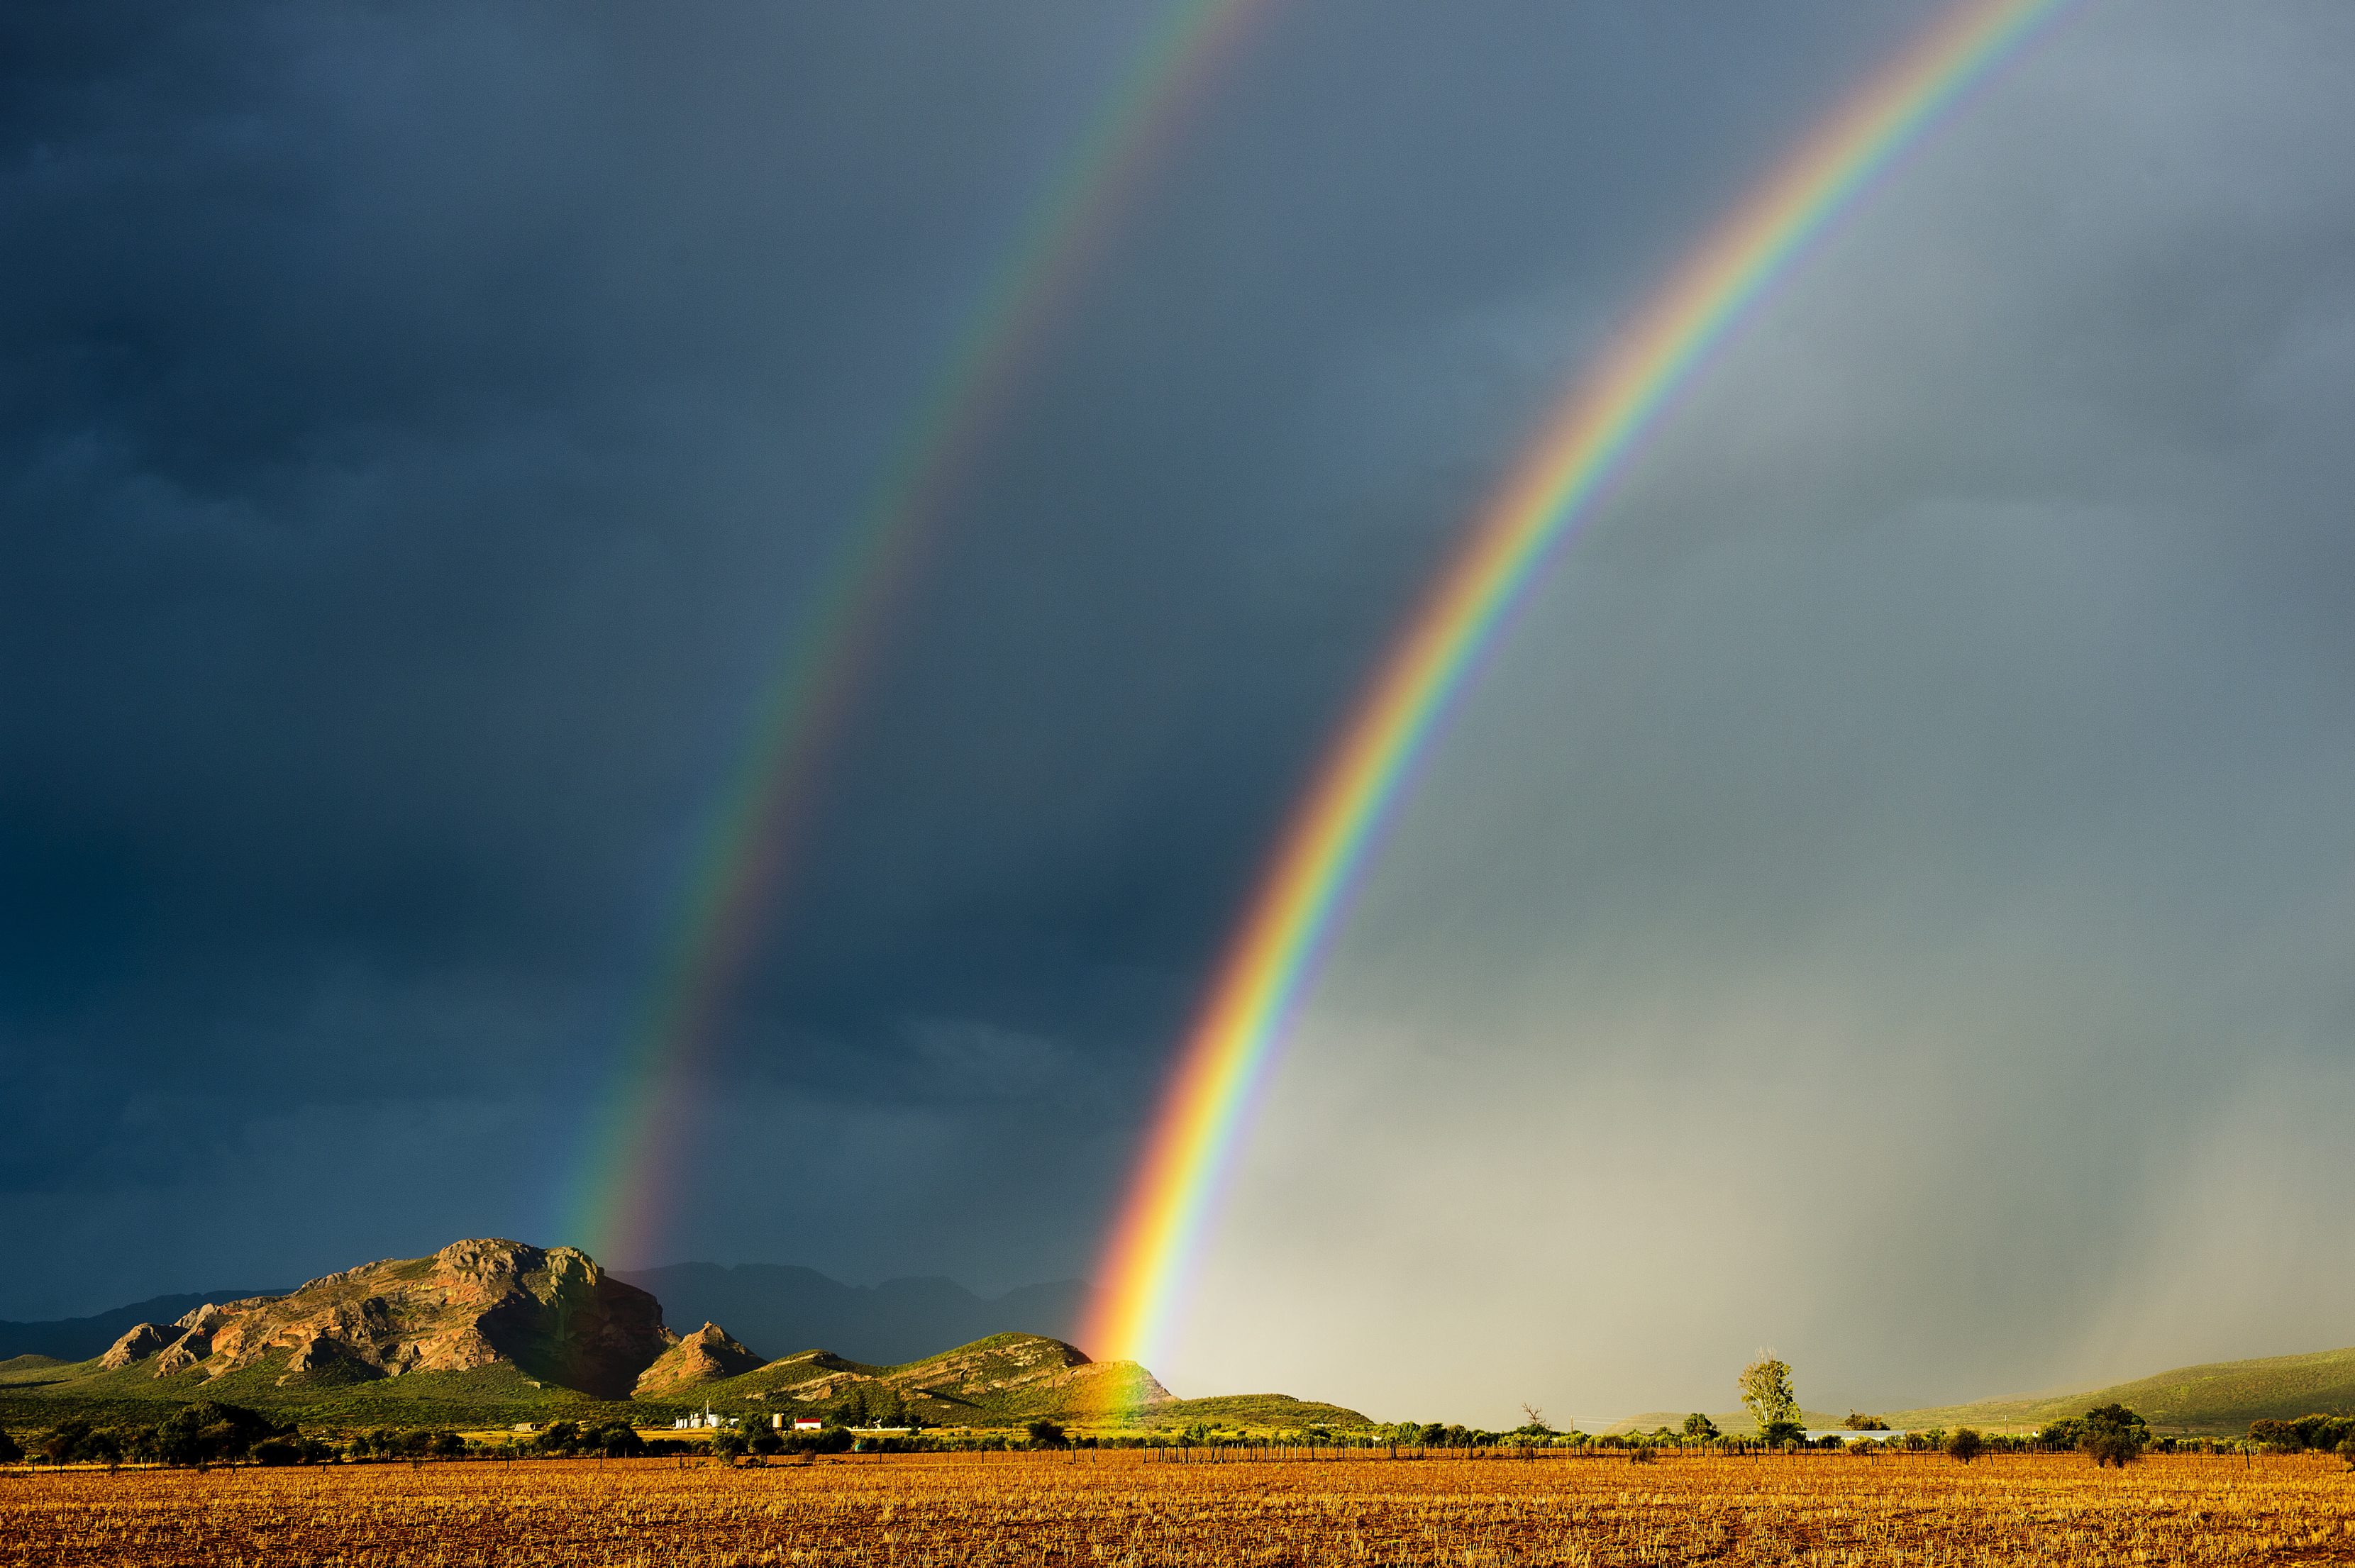 A rainbow during the Klein Karoo Nationale Kunstefees on March 28, 2013, in Oudshoorn, South Africa.